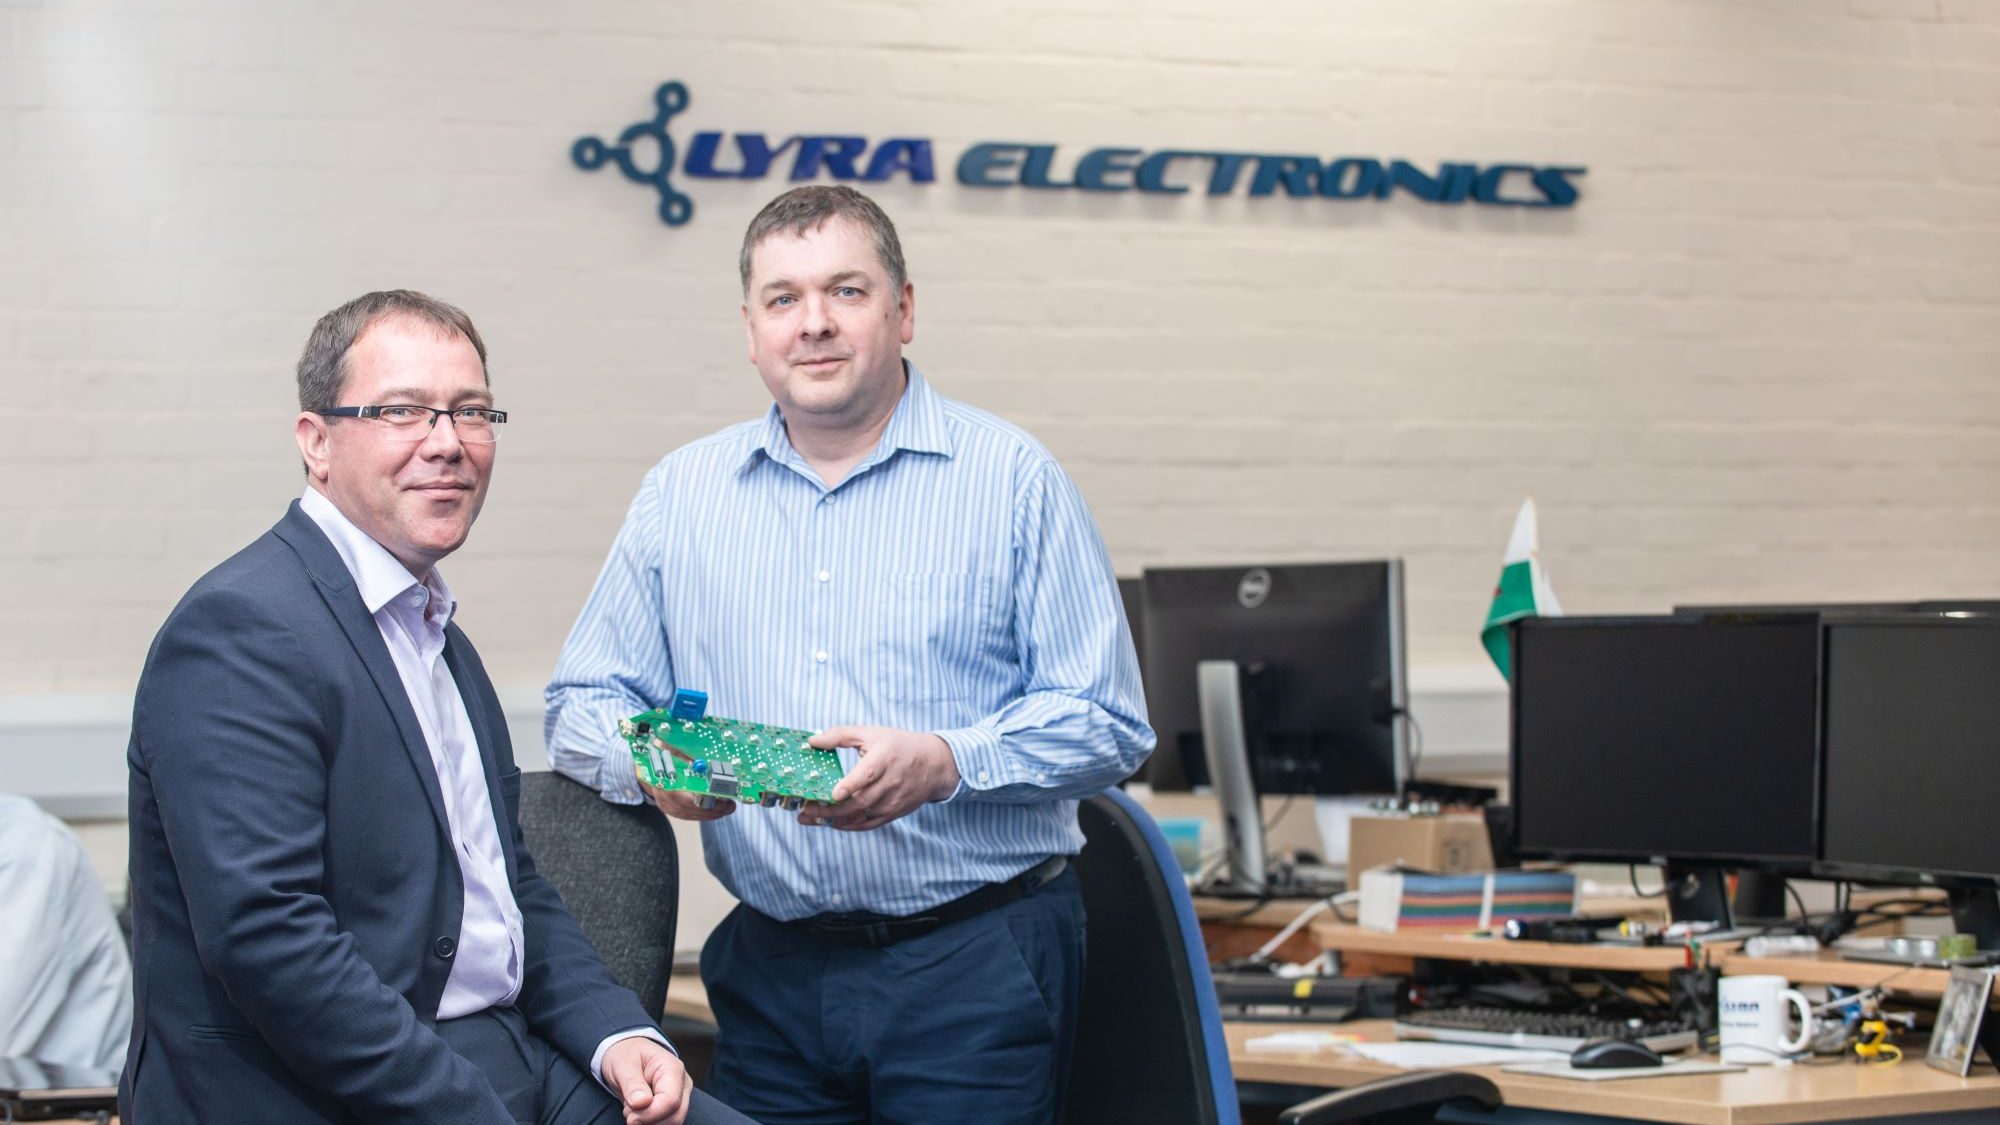 Support for Warwickshire firm at the heart of zero emissions tech